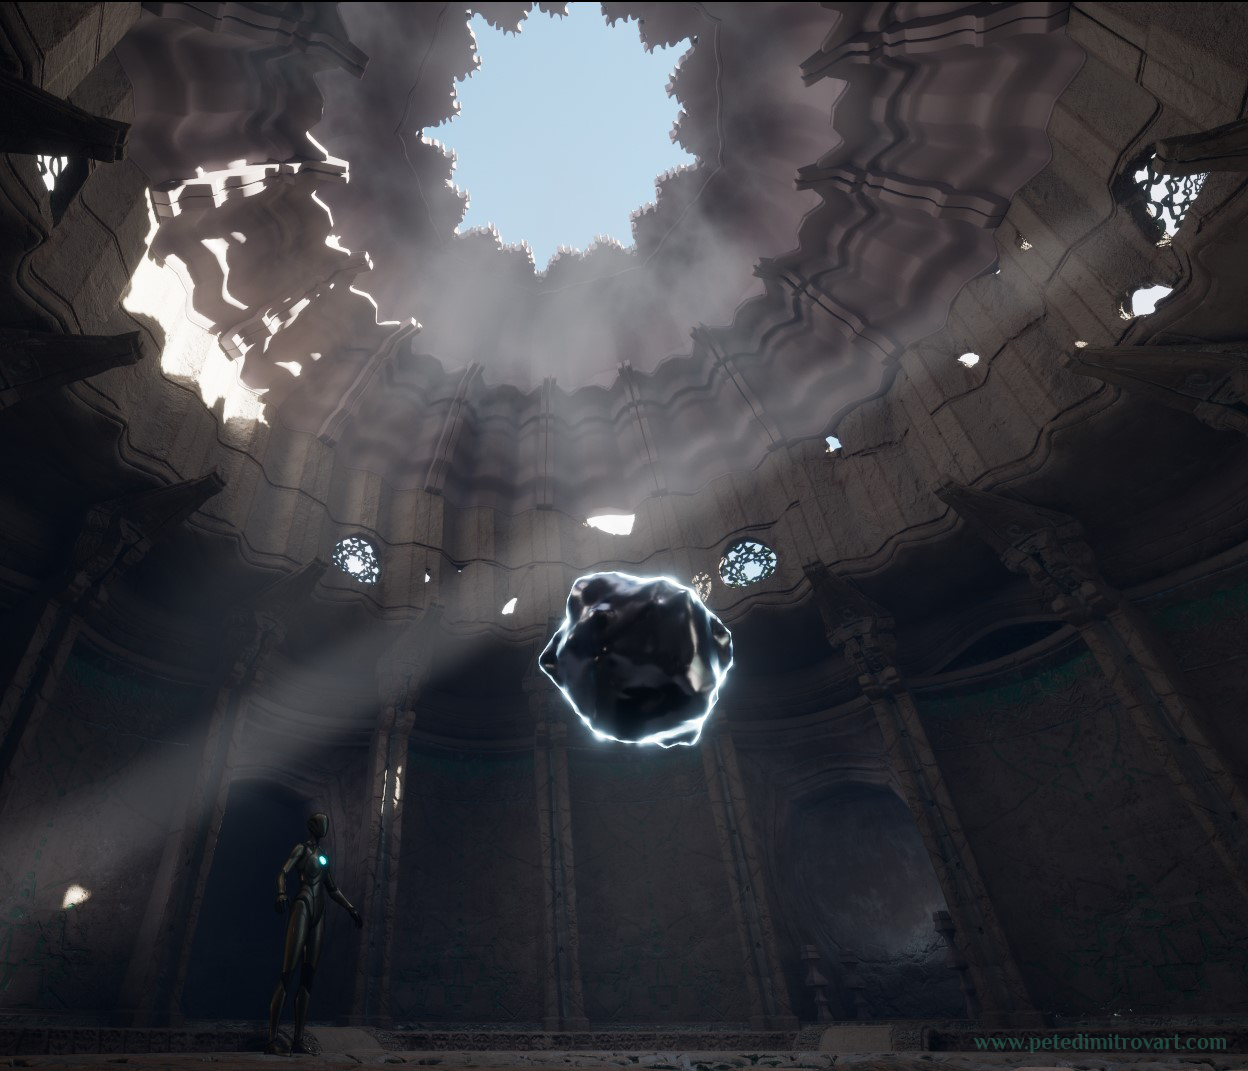 Image crop looking at the upper parts of the scene. Shows the dome ceiling building up few levels of shapes and silhouettes. The top one is the most intricate one, with flower and fractal elements. All of the upper parts have placeholder, gray, materials while the lower parts are textured. UE5 image.